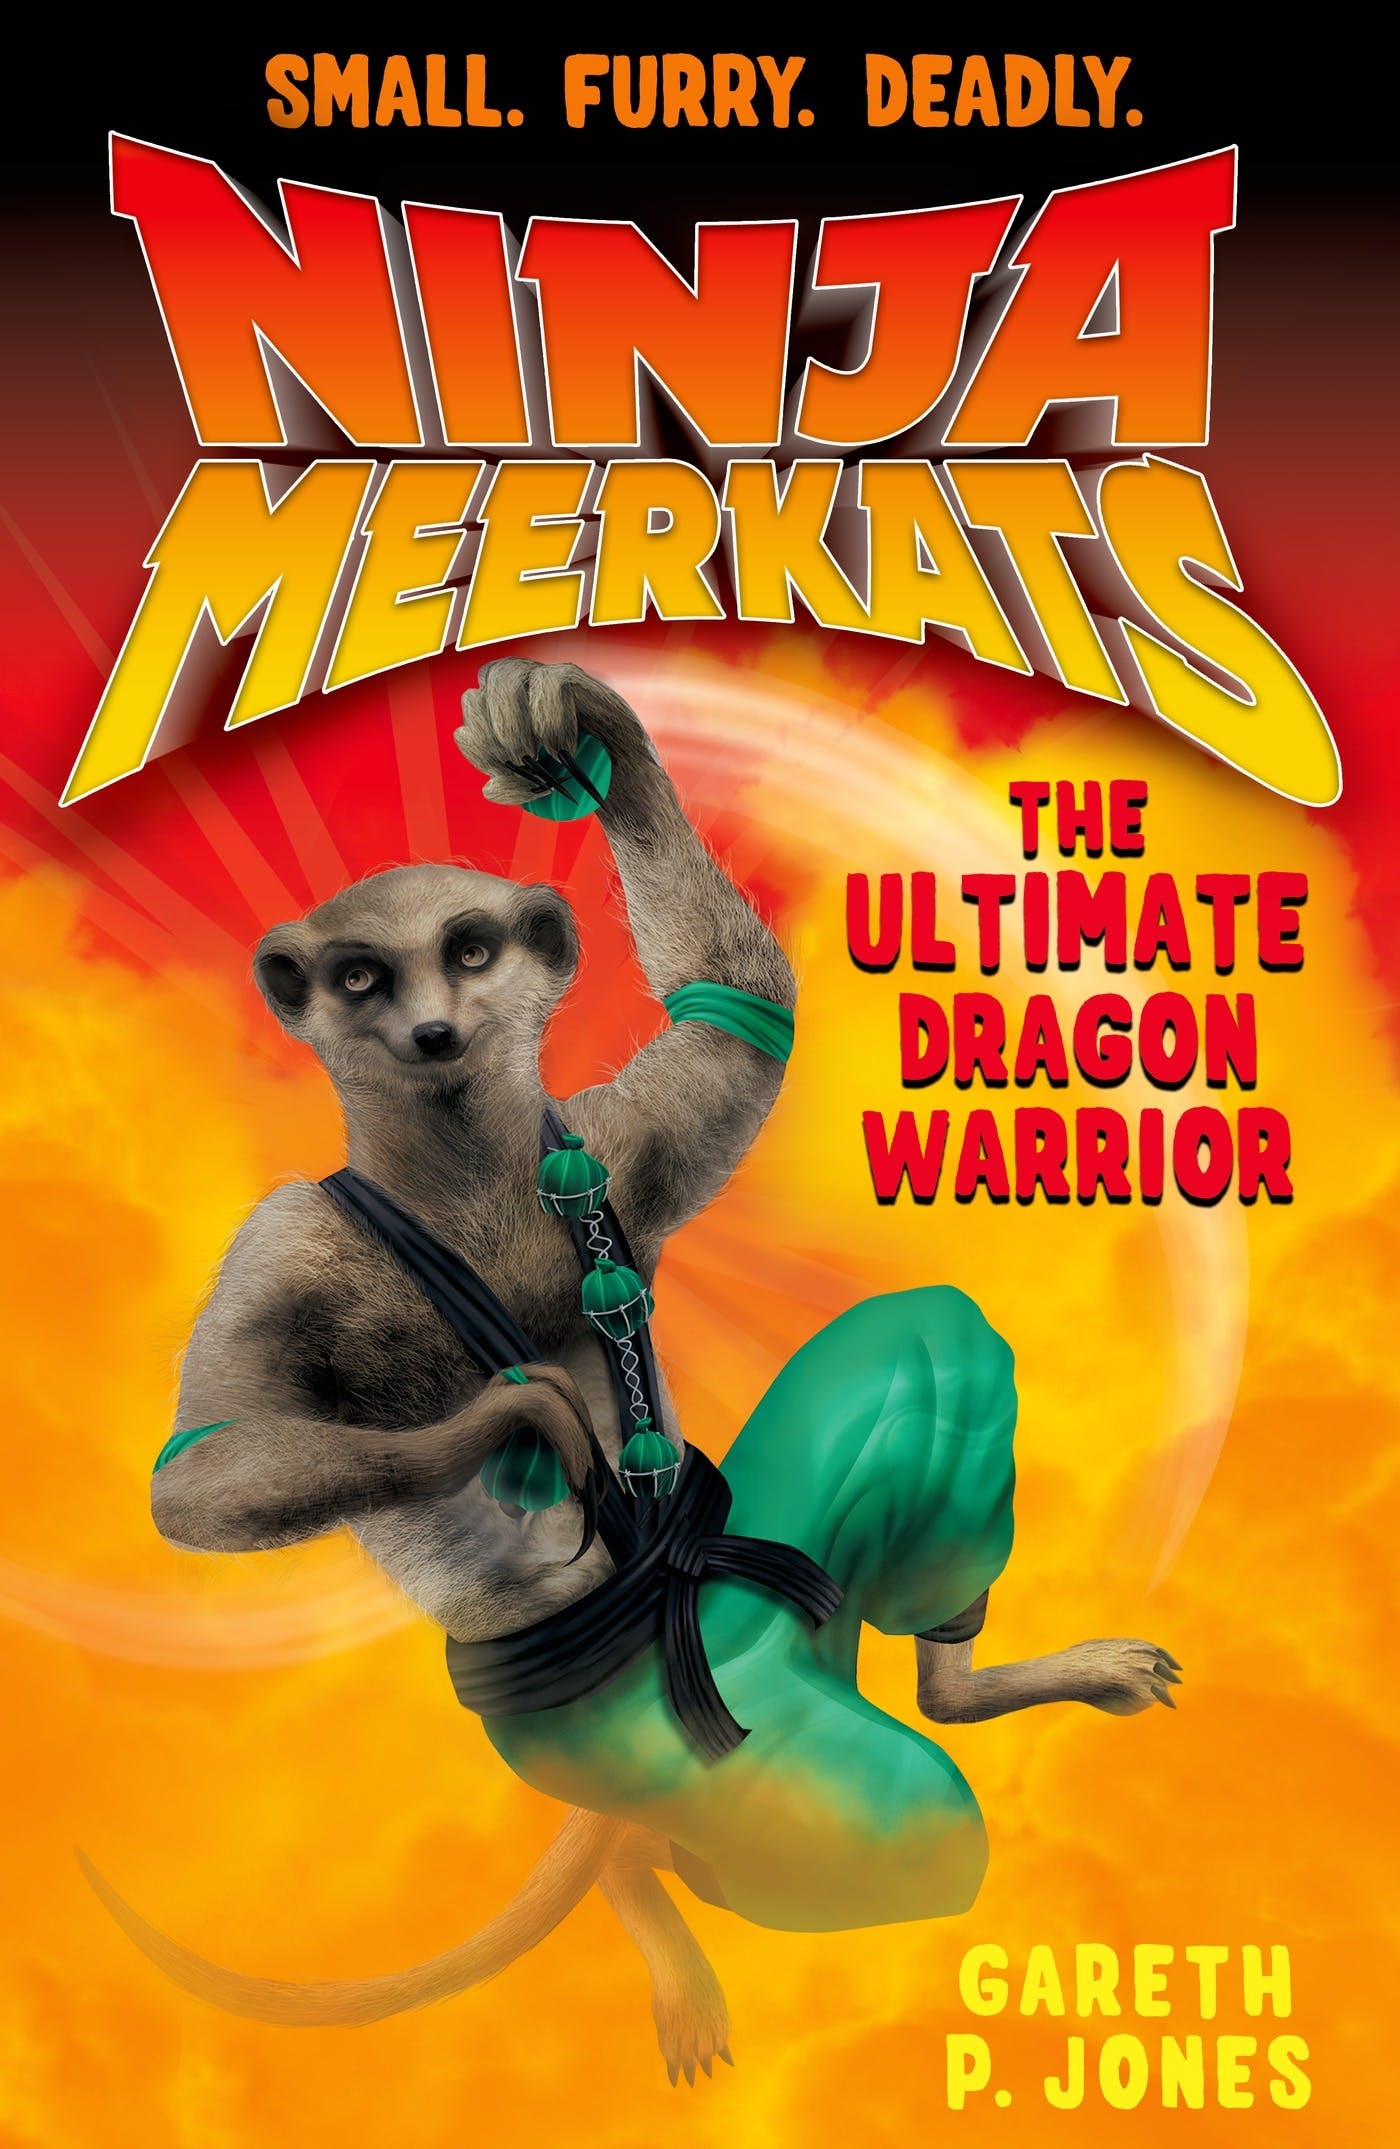 The ultimate dragon warrior